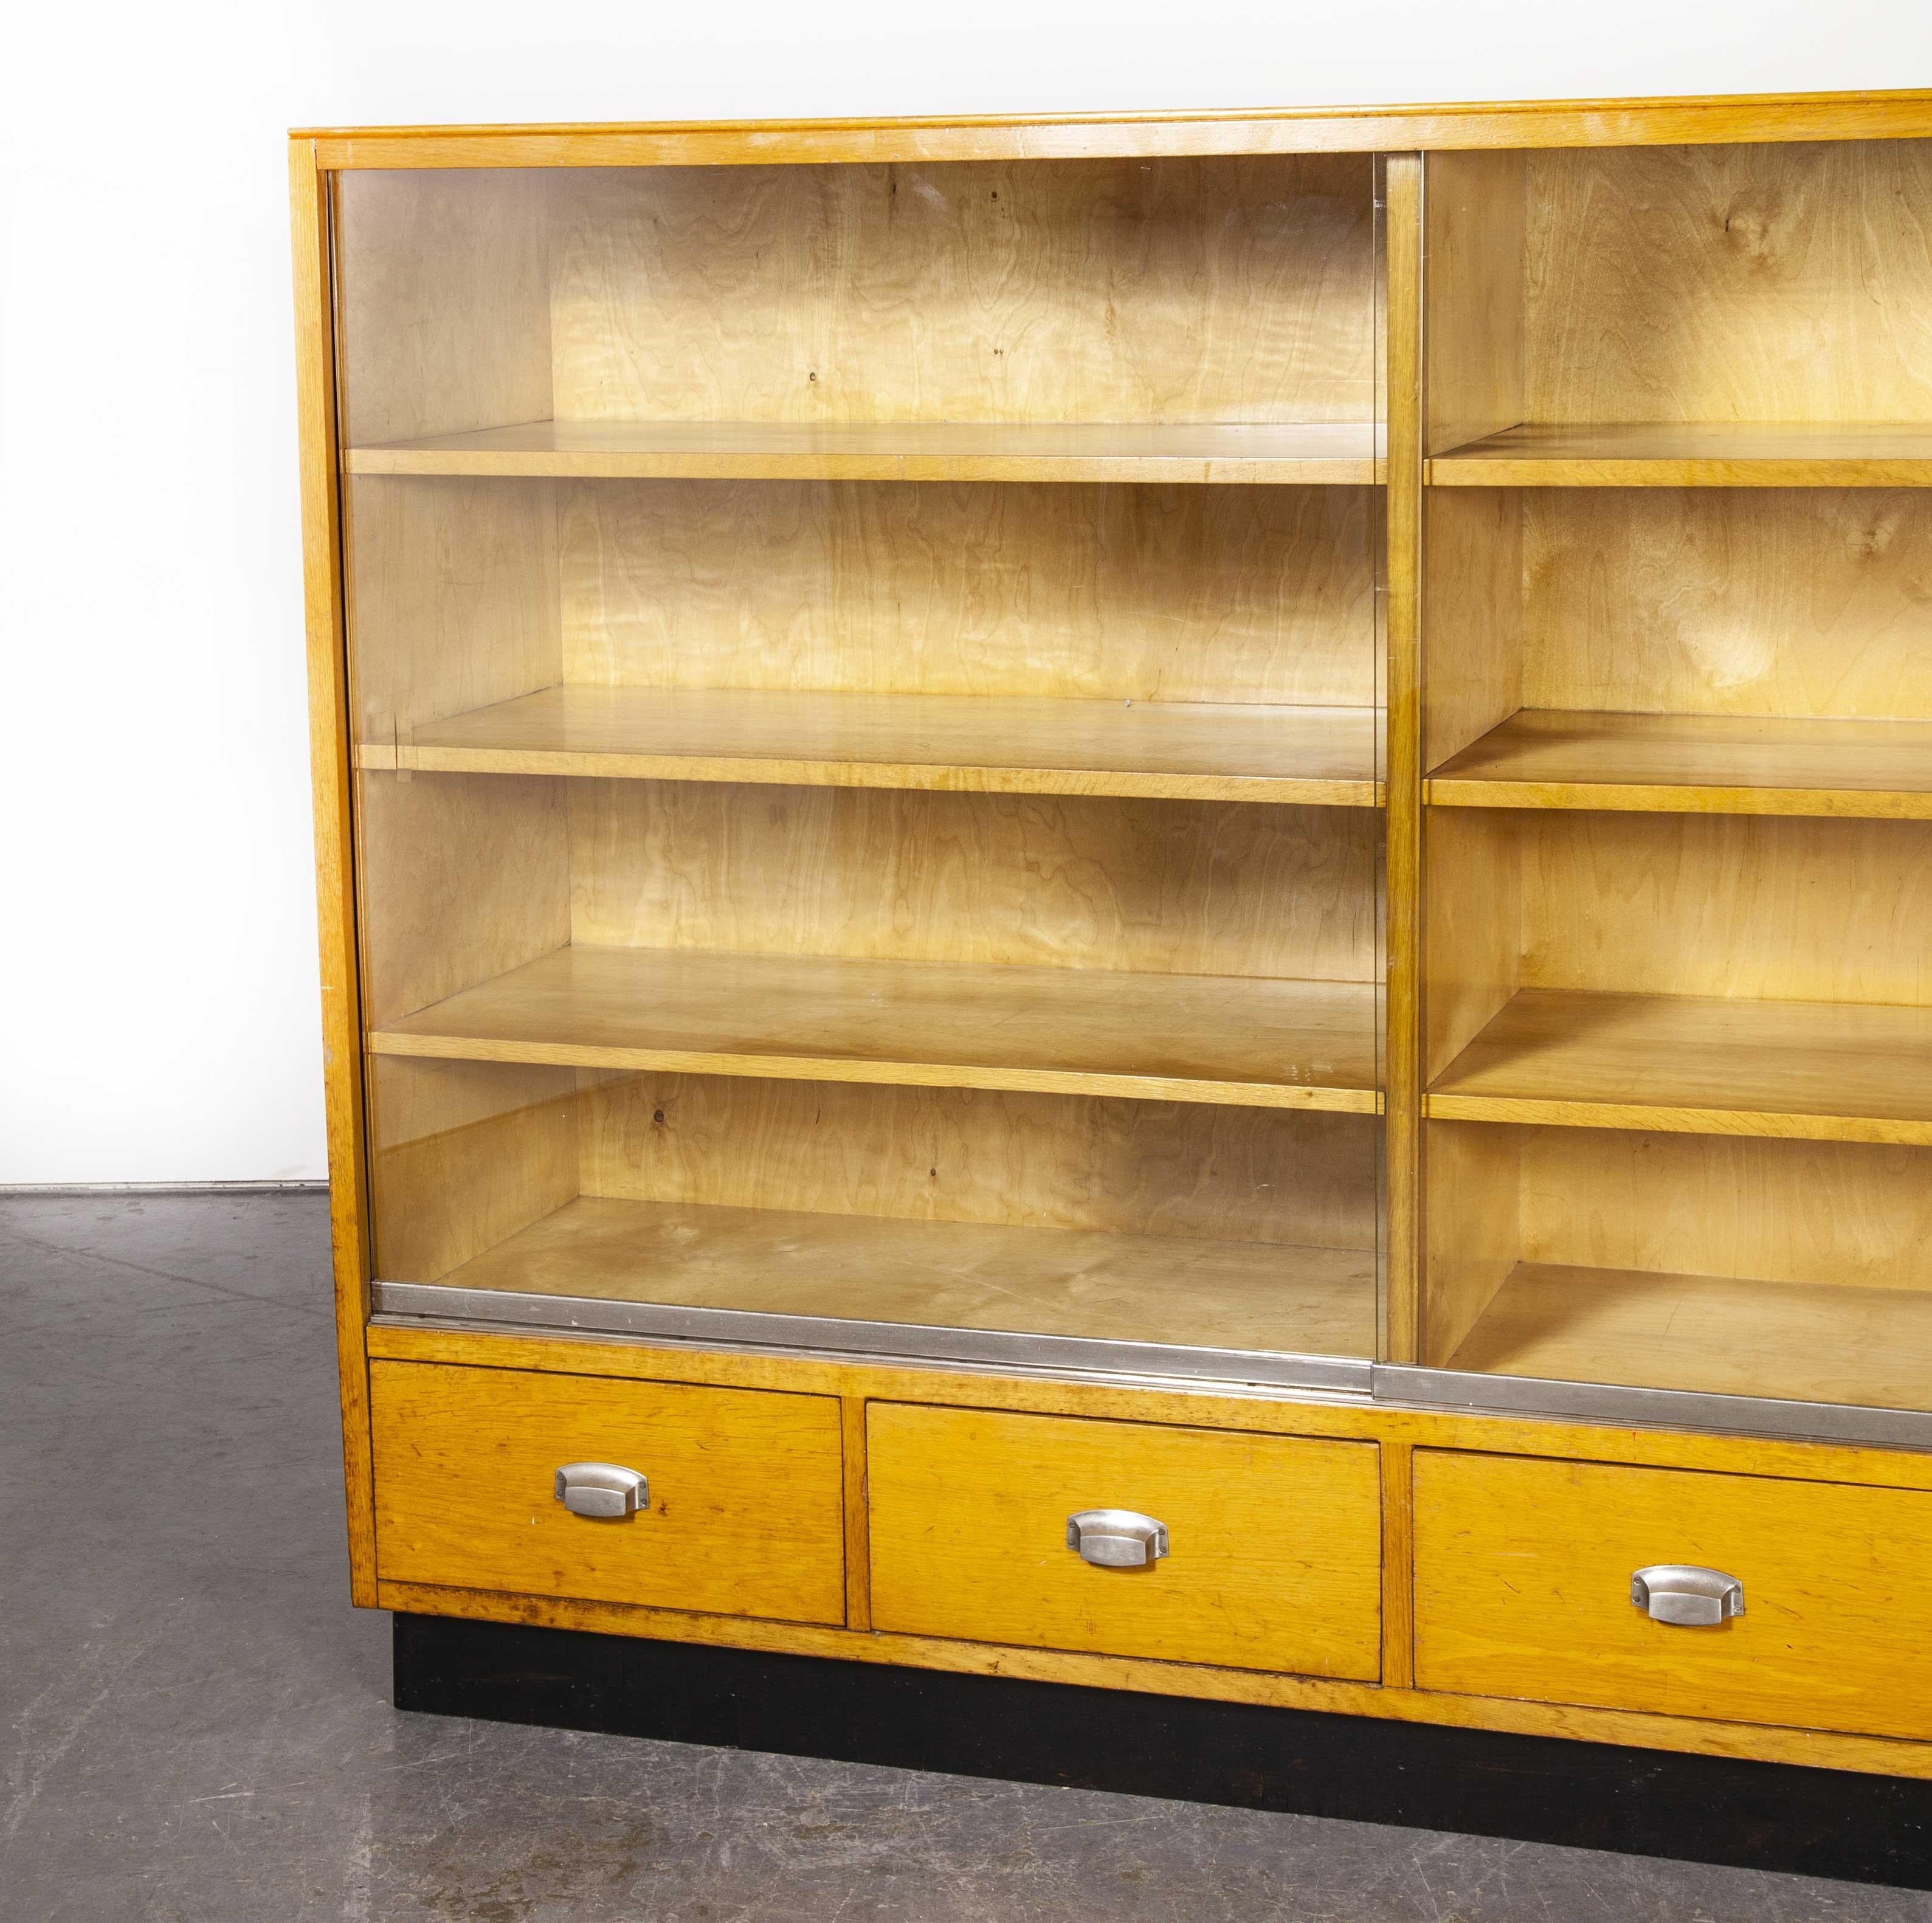 Beech 1950s Large Glass Fronted Midcentury Apothecary Cabinet, Storage Unit